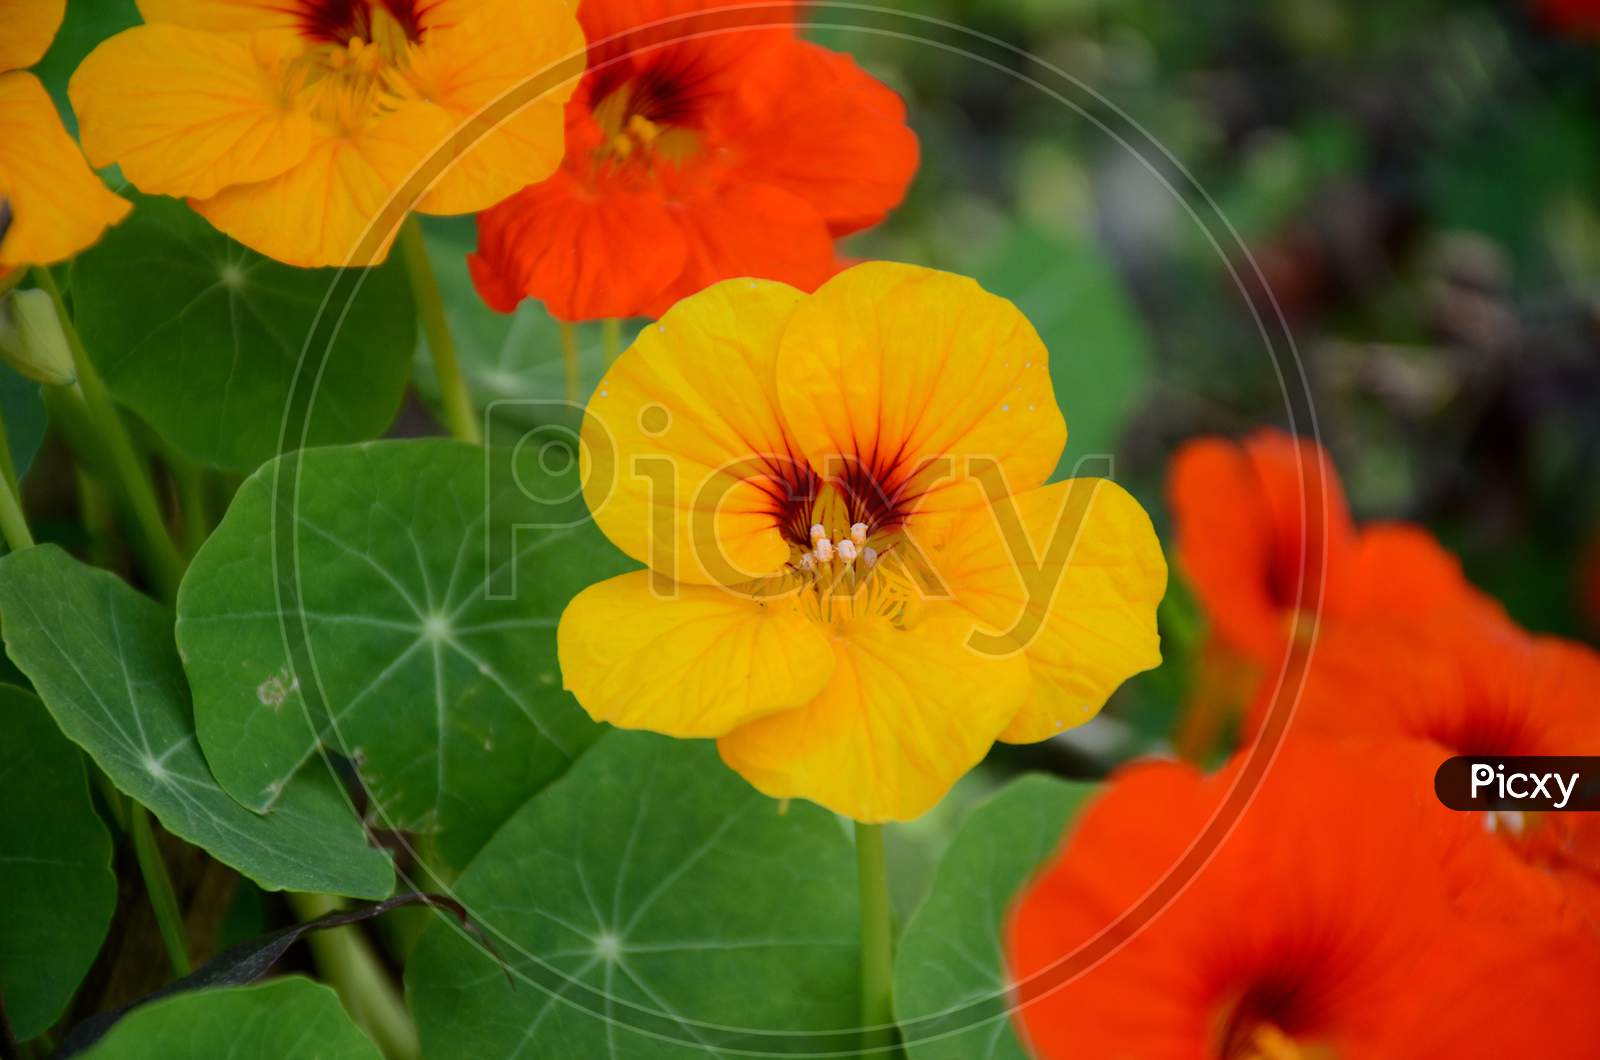 The Yellow Orange Nasturtium Flowers With Vine And Green Leaves In The Garden.